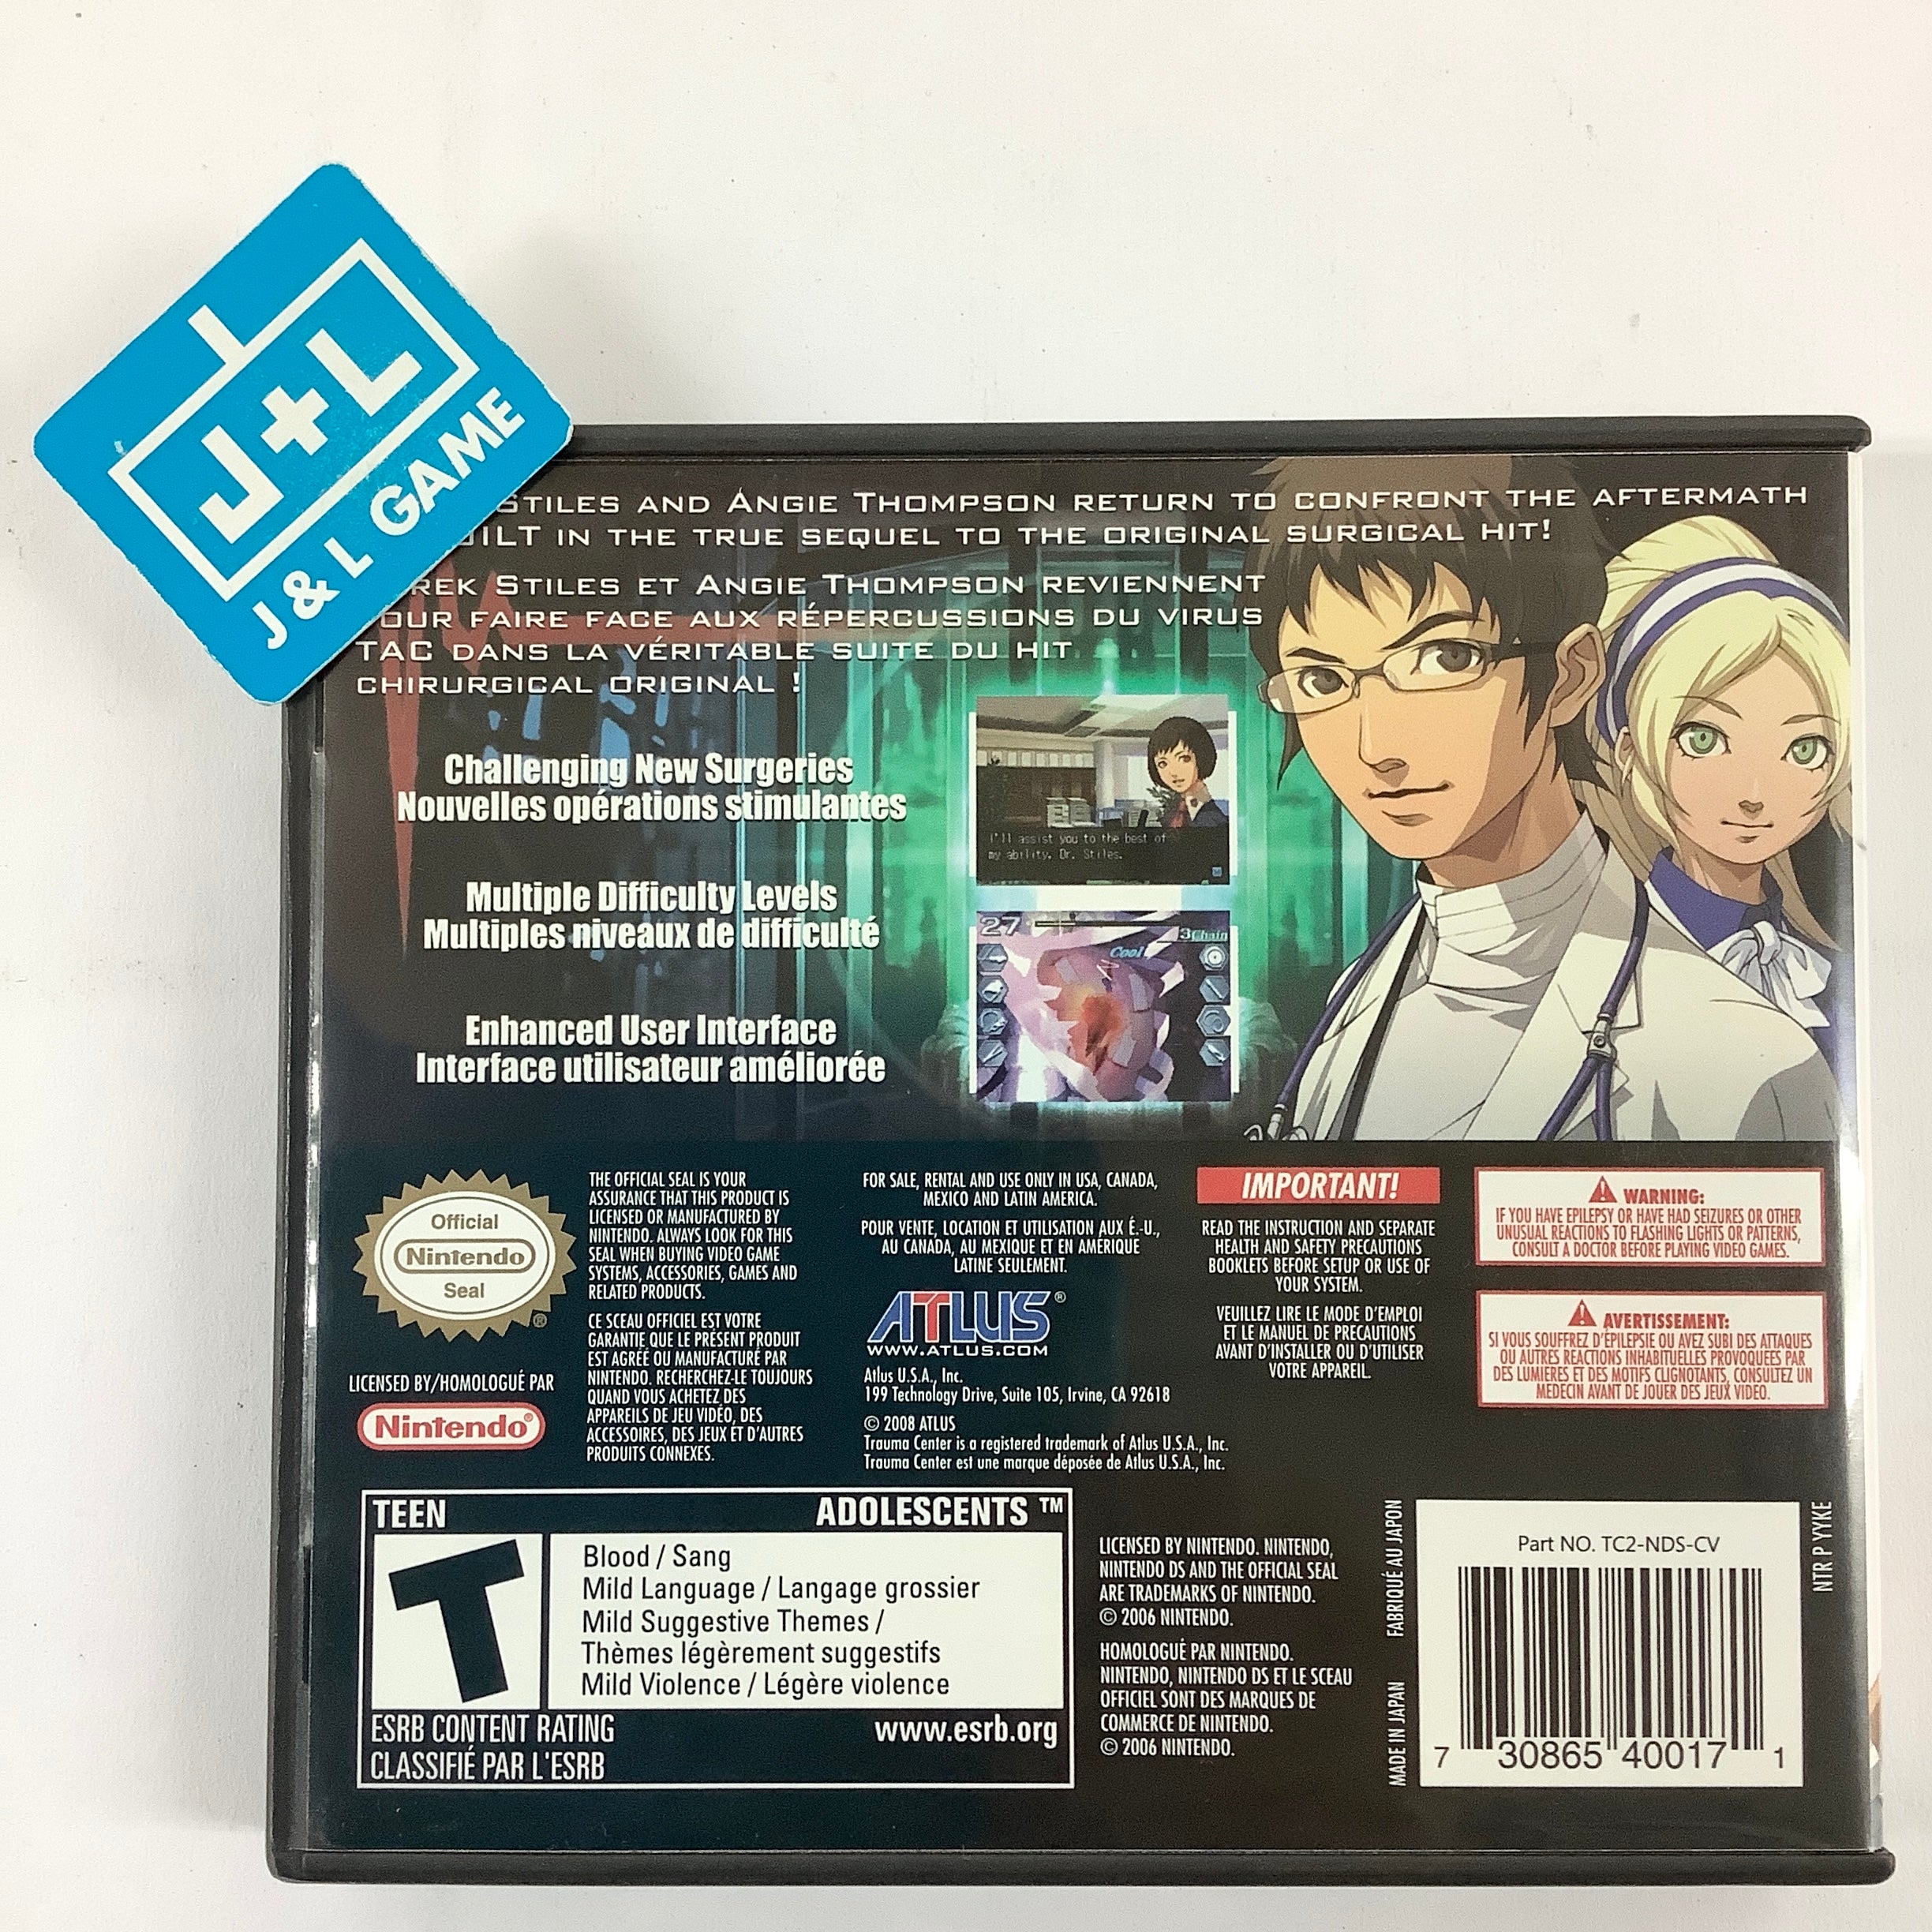 Trauma Center: Under the Knife 2 - (NDS) Nintendo DS [Pre-Owned] Video Games Atlus   